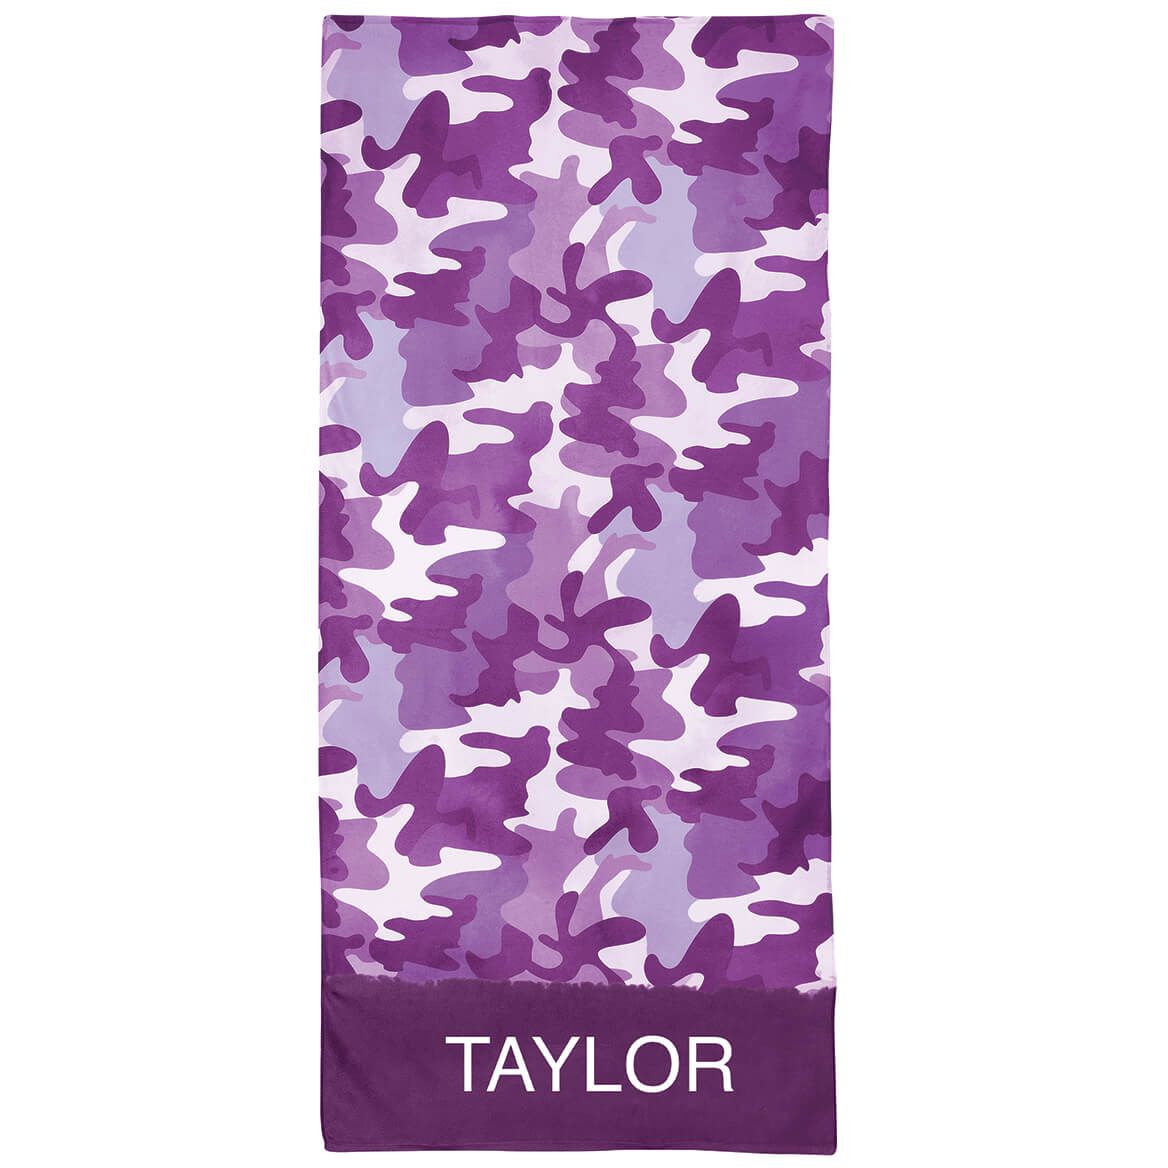 Personalized Camouflage Beach Towel + '-' + 374930